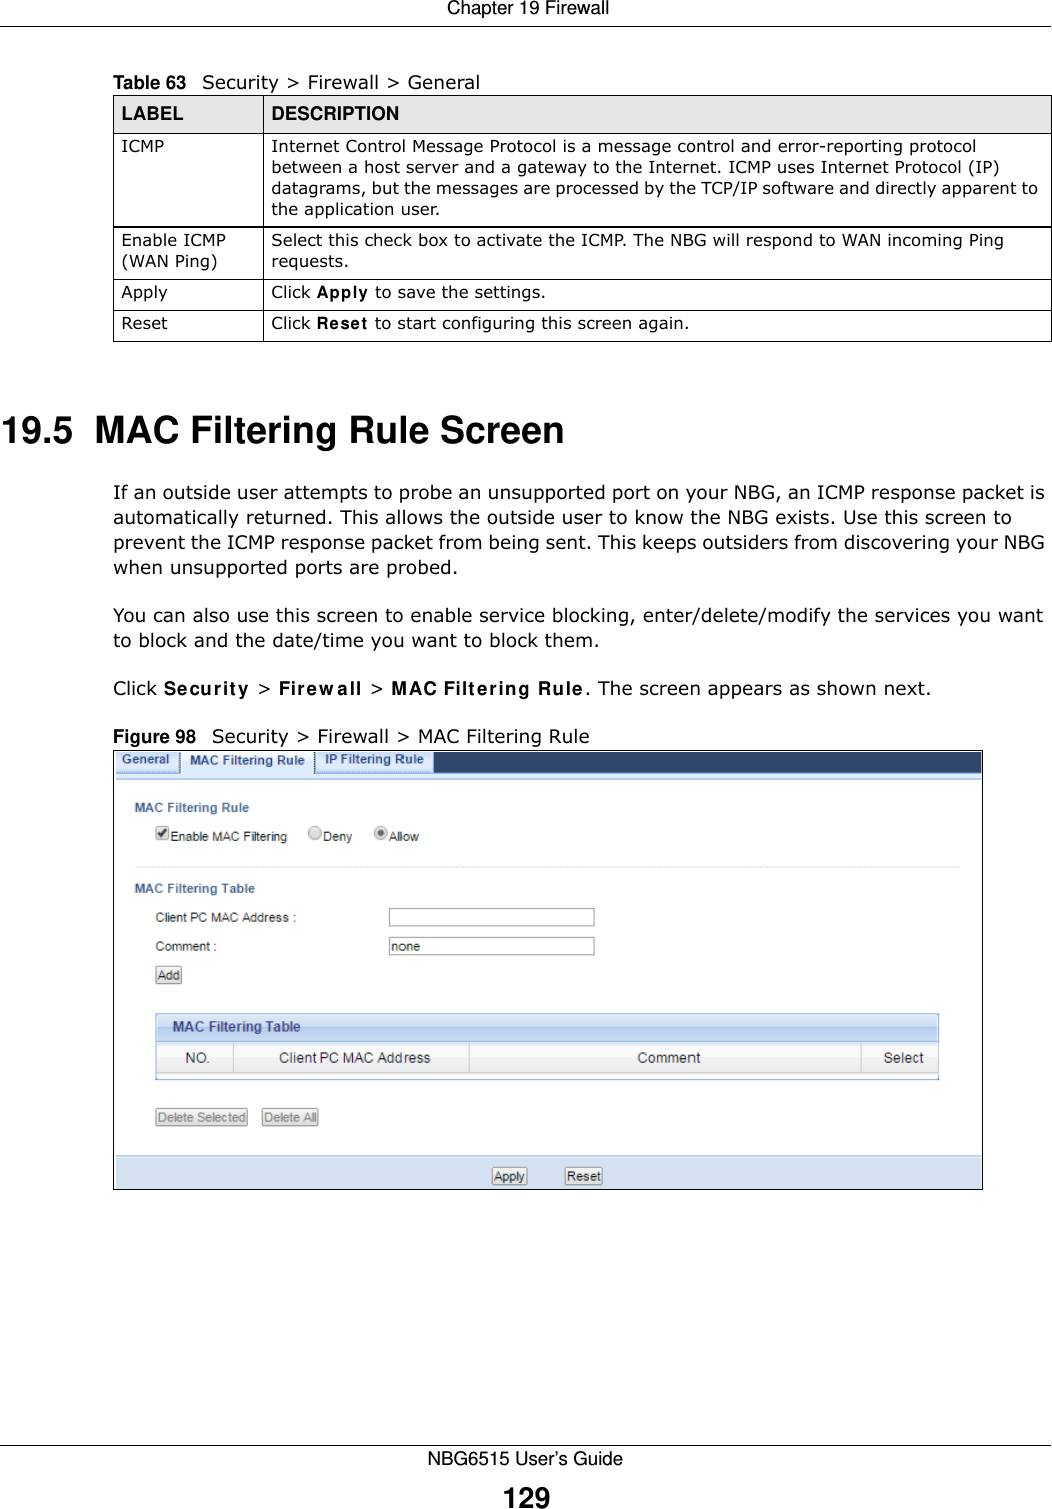  Chapter 19 FirewallNBG6515 User’s Guide12919.5  MAC Filtering Rule Screen If an outside user attempts to probe an unsupported port on your NBG, an ICMP response packet is automatically returned. This allows the outside user to know the NBG exists. Use this screen to prevent the ICMP response packet from being sent. This keeps outsiders from discovering your NBG when unsupported ports are probed.You can also use this screen to enable service blocking, enter/delete/modify the services you want to block and the date/time you want to block them.Click Security &gt; Firewall &gt; MAC Filtering Rule. The screen appears as shown next. Figure 98   Security &gt; Firewall &gt; MAC Filtering Rule ICMP Internet Control Message Protocol is a message control and error-reporting protocol between a host server and a gateway to the Internet. ICMP uses Internet Protocol (IP) datagrams, but the messages are processed by the TCP/IP software and directly apparent to the application user. Enable ICMP (WAN Ping)Select this check box to activate the ICMP. The NBG will respond to WAN incoming Ping requests.Apply Click Apply to save the settings. Reset Click Reset to start configuring this screen again. Table 63   Security &gt; Firewall &gt; General LABEL DESCRIPTION